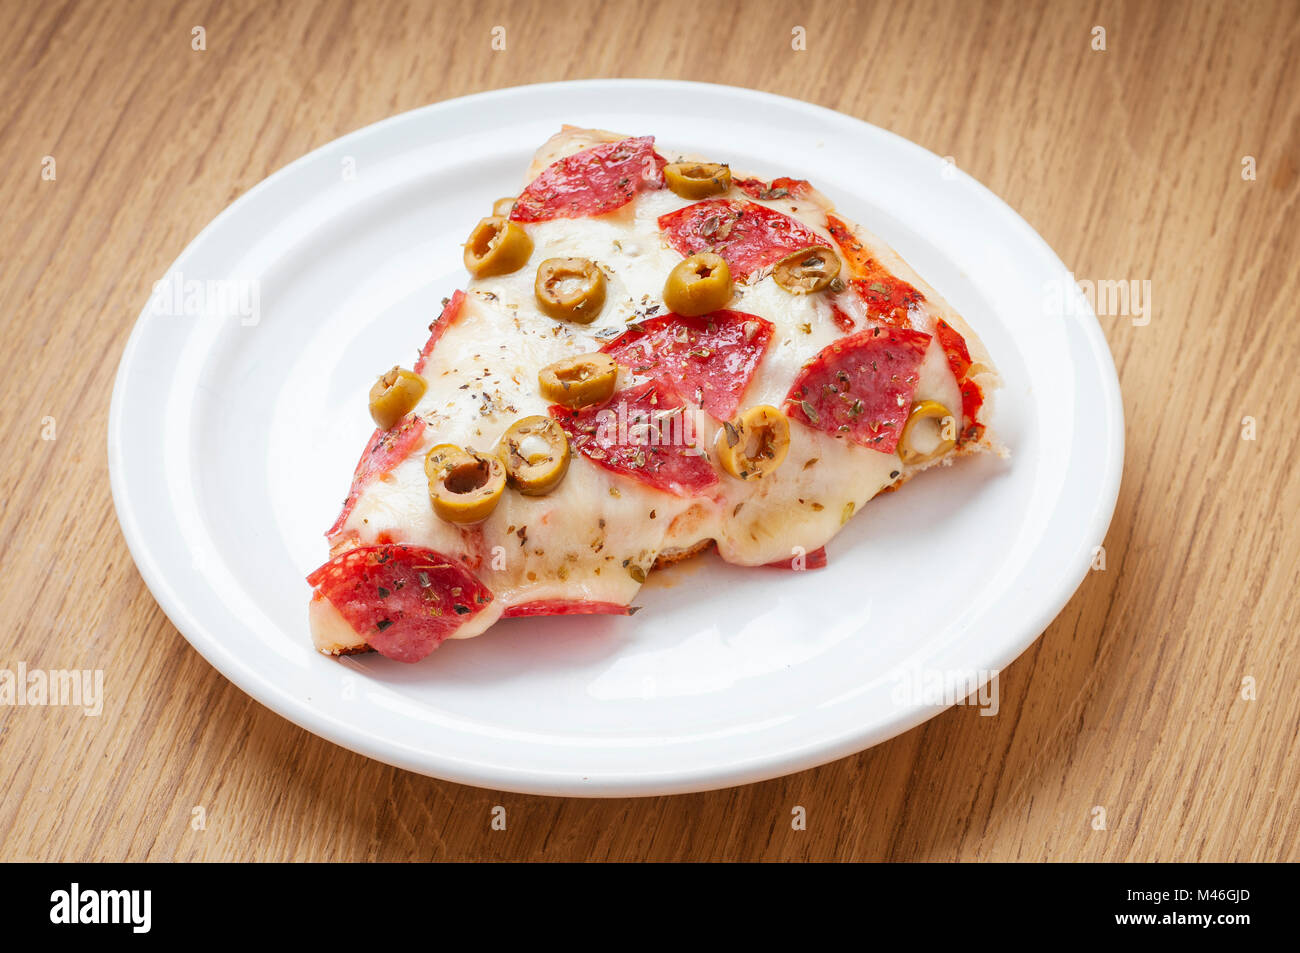 delicious crunchy and fluffy dough pizza Stock Photo